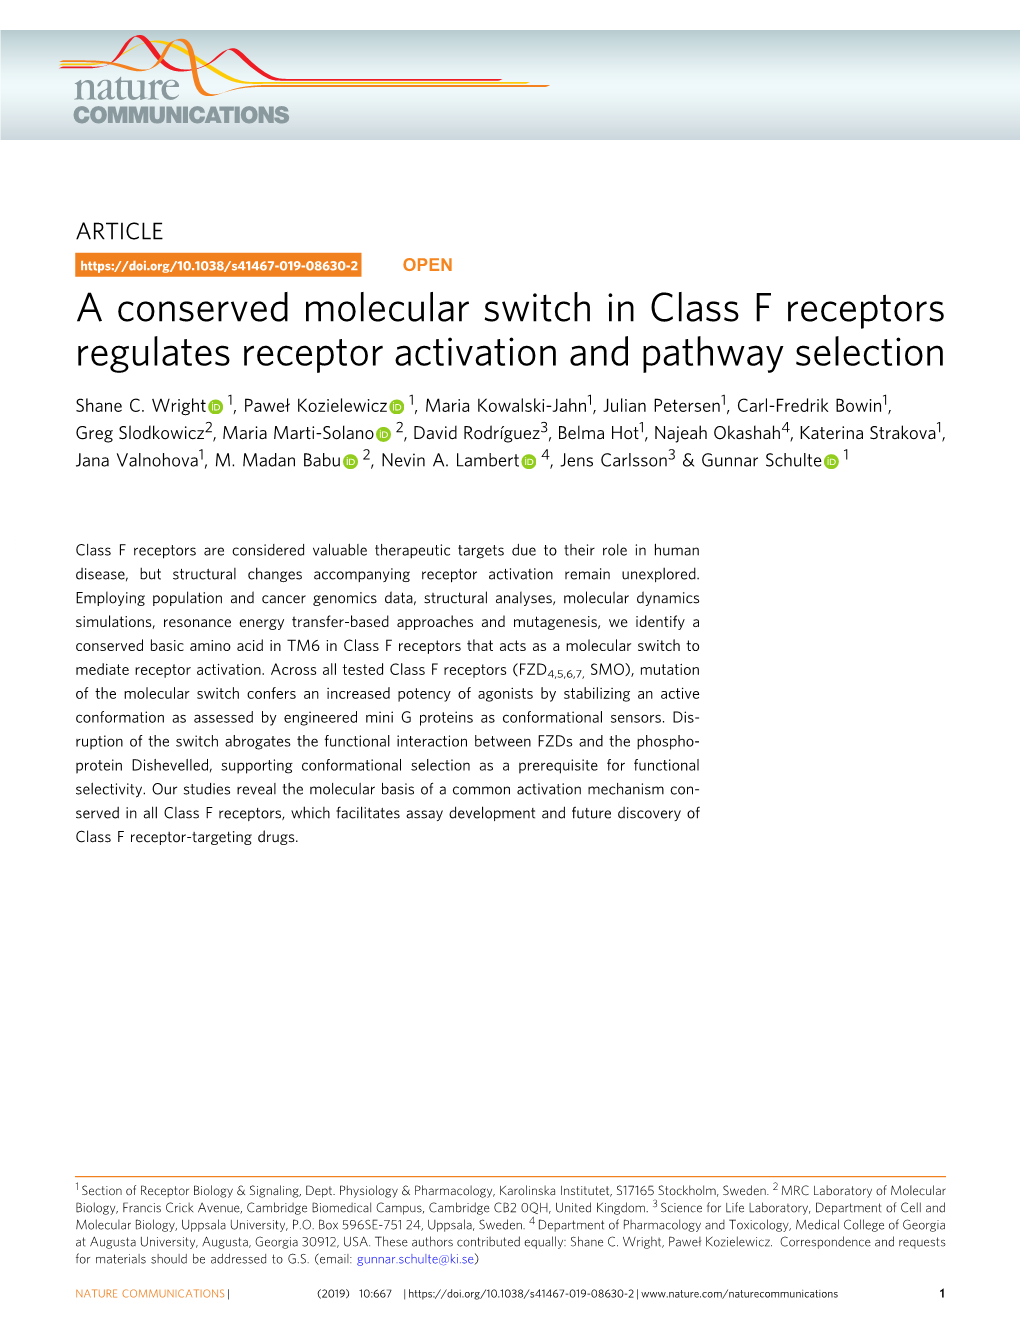 A Conserved Molecular Switch in Class F Receptors Regulates Receptor Activation and Pathway Selection